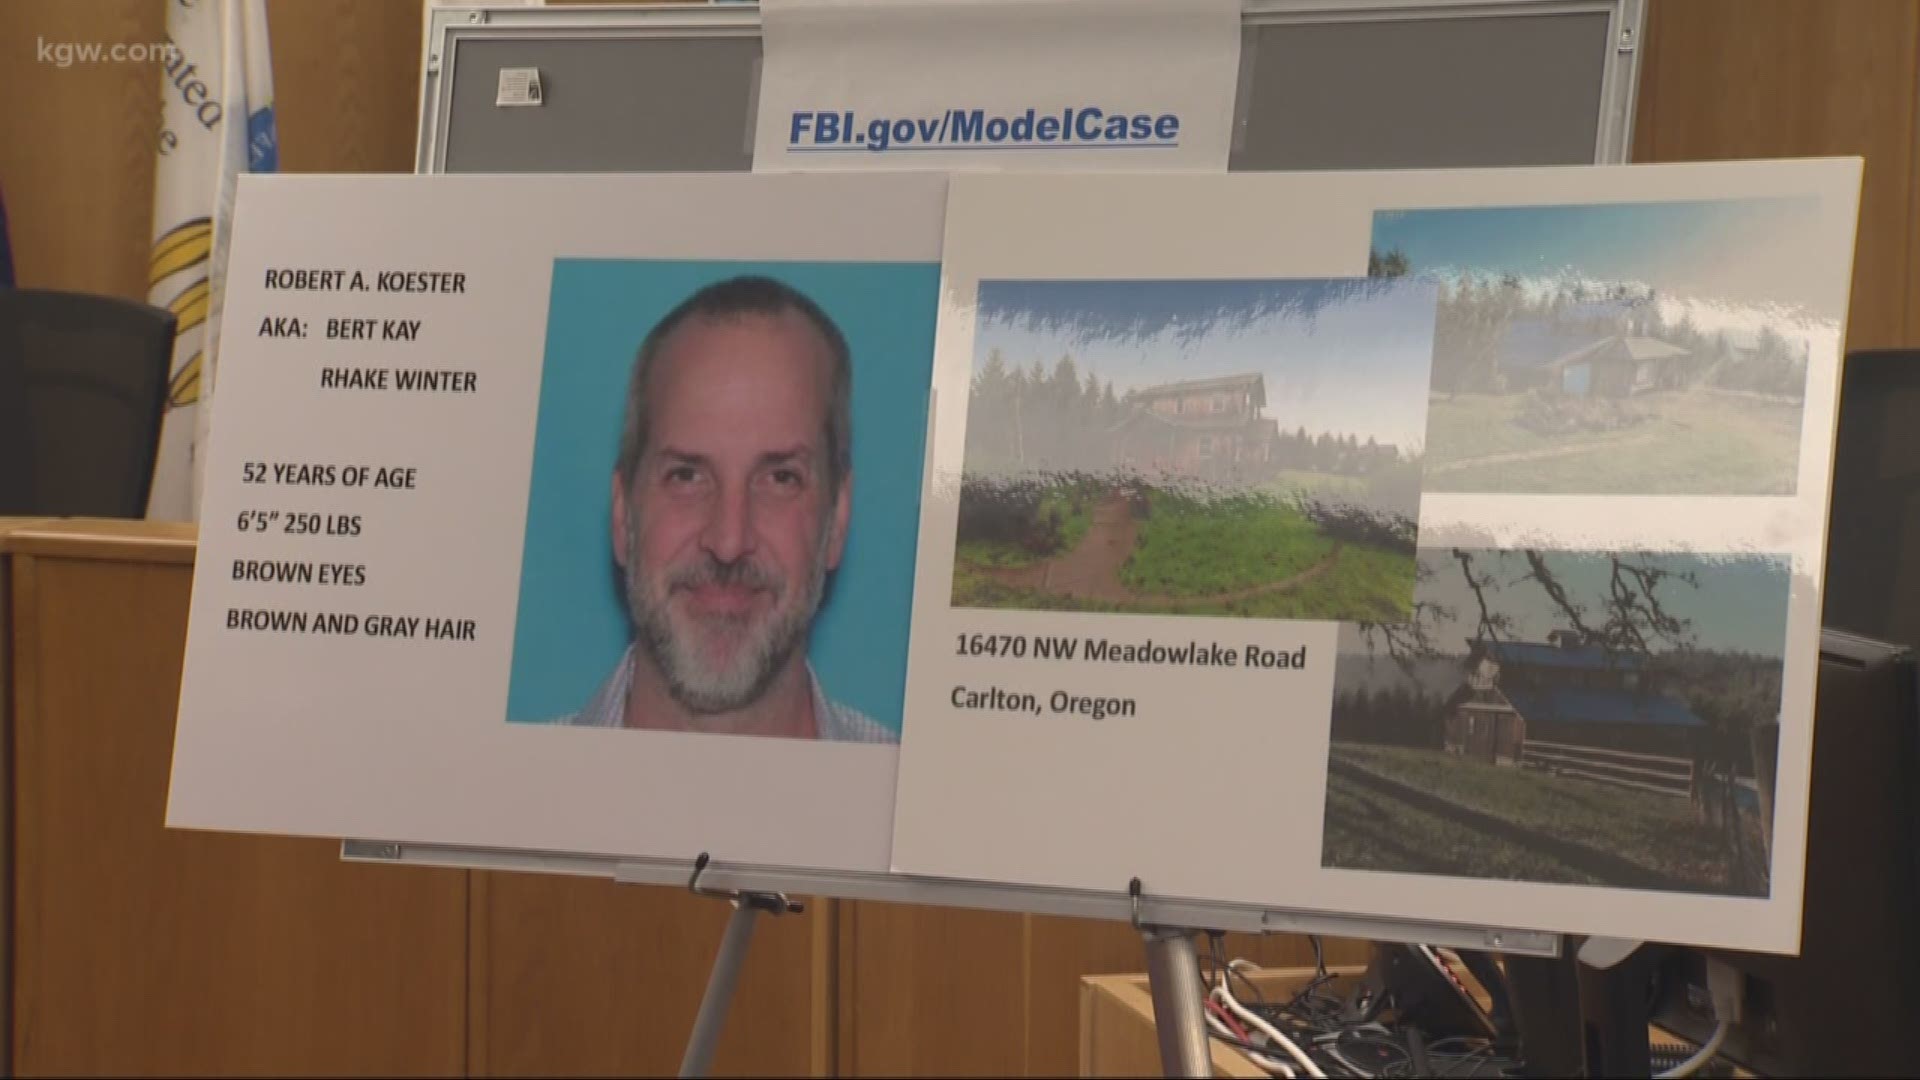 A suspected sexual predator has been indicted in connection with sex crimes against victims in Oregon and California, according to the FBI